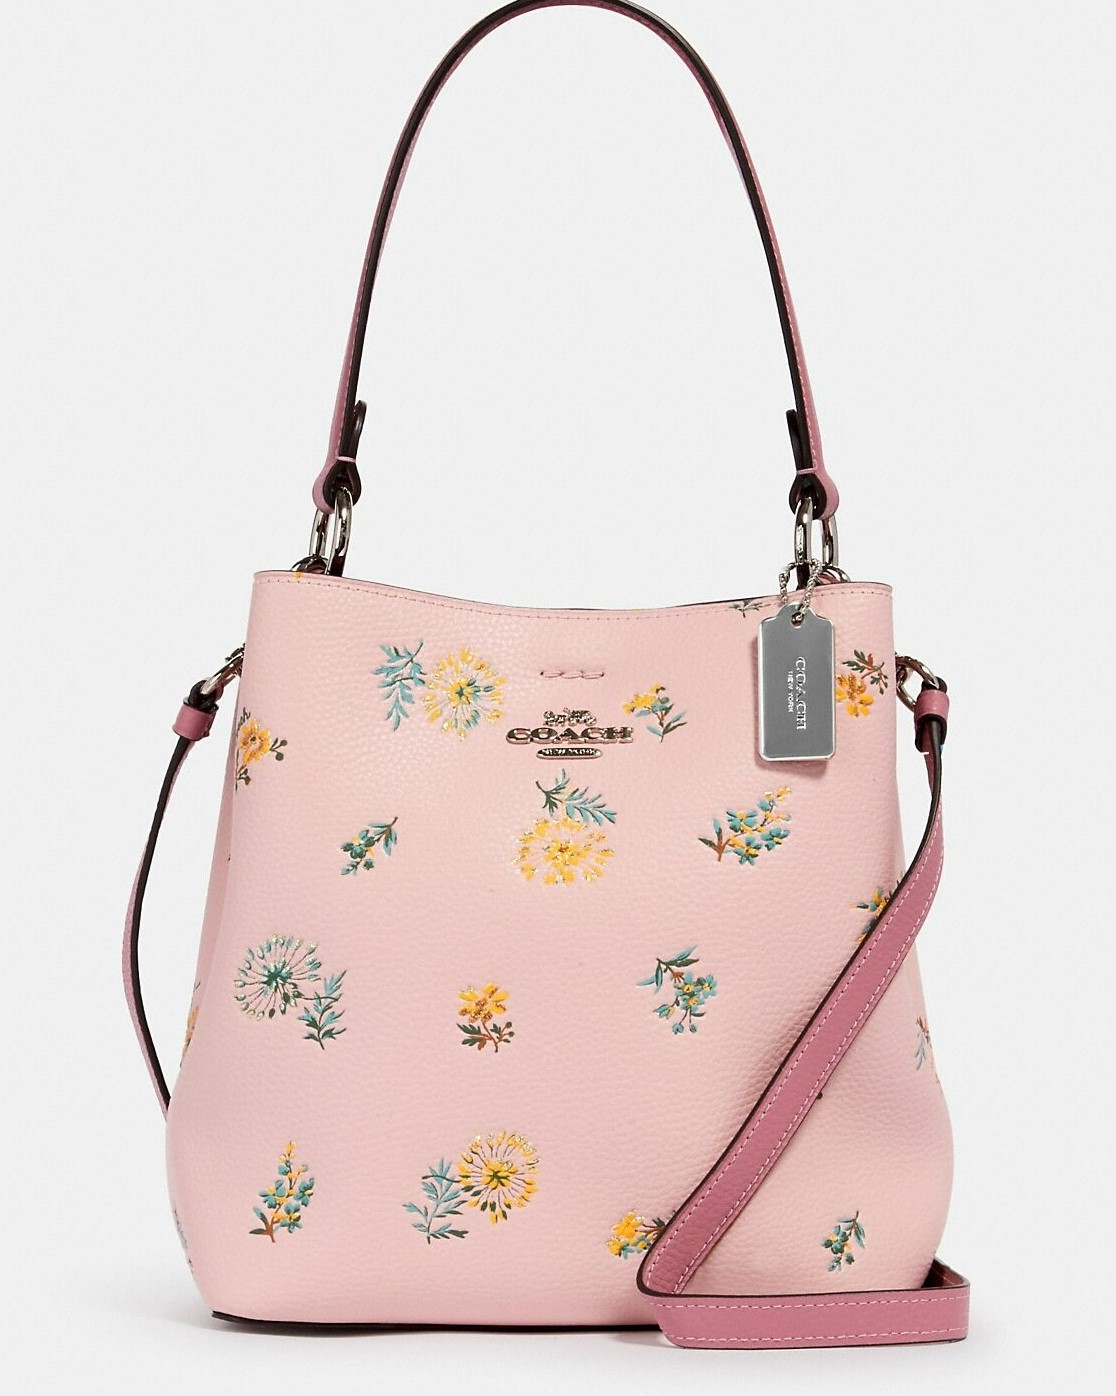 TÚI ĐEO CHÉO NỮ COACH IN HOA SMALL TOWN PEBBLE LEATHER BUCKET BAG WITH DANDELION FLORAL PRINT 2310 2